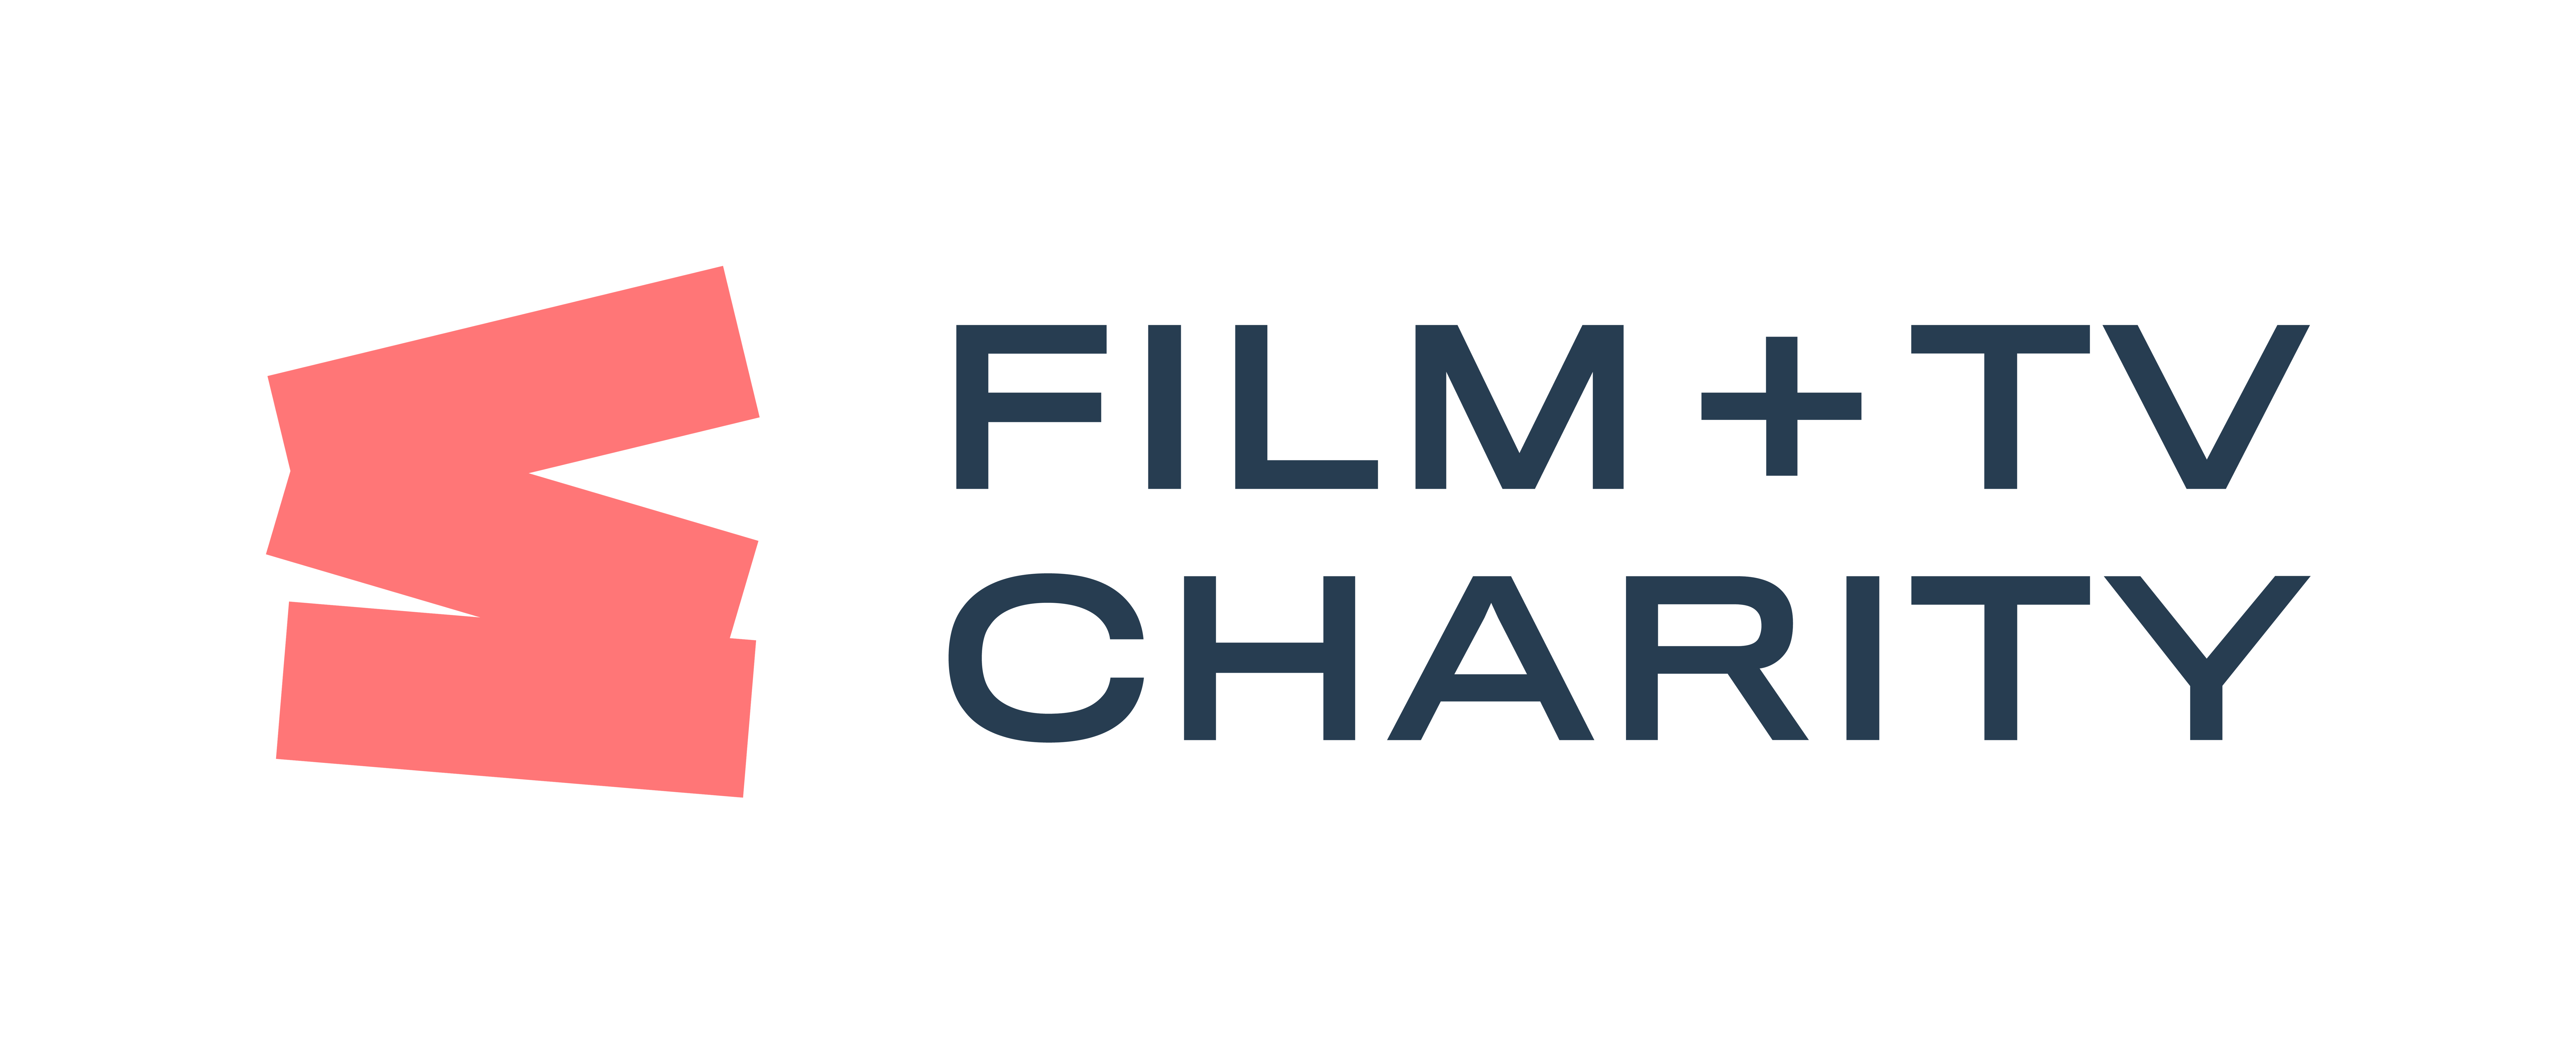 The Film and TV Charity